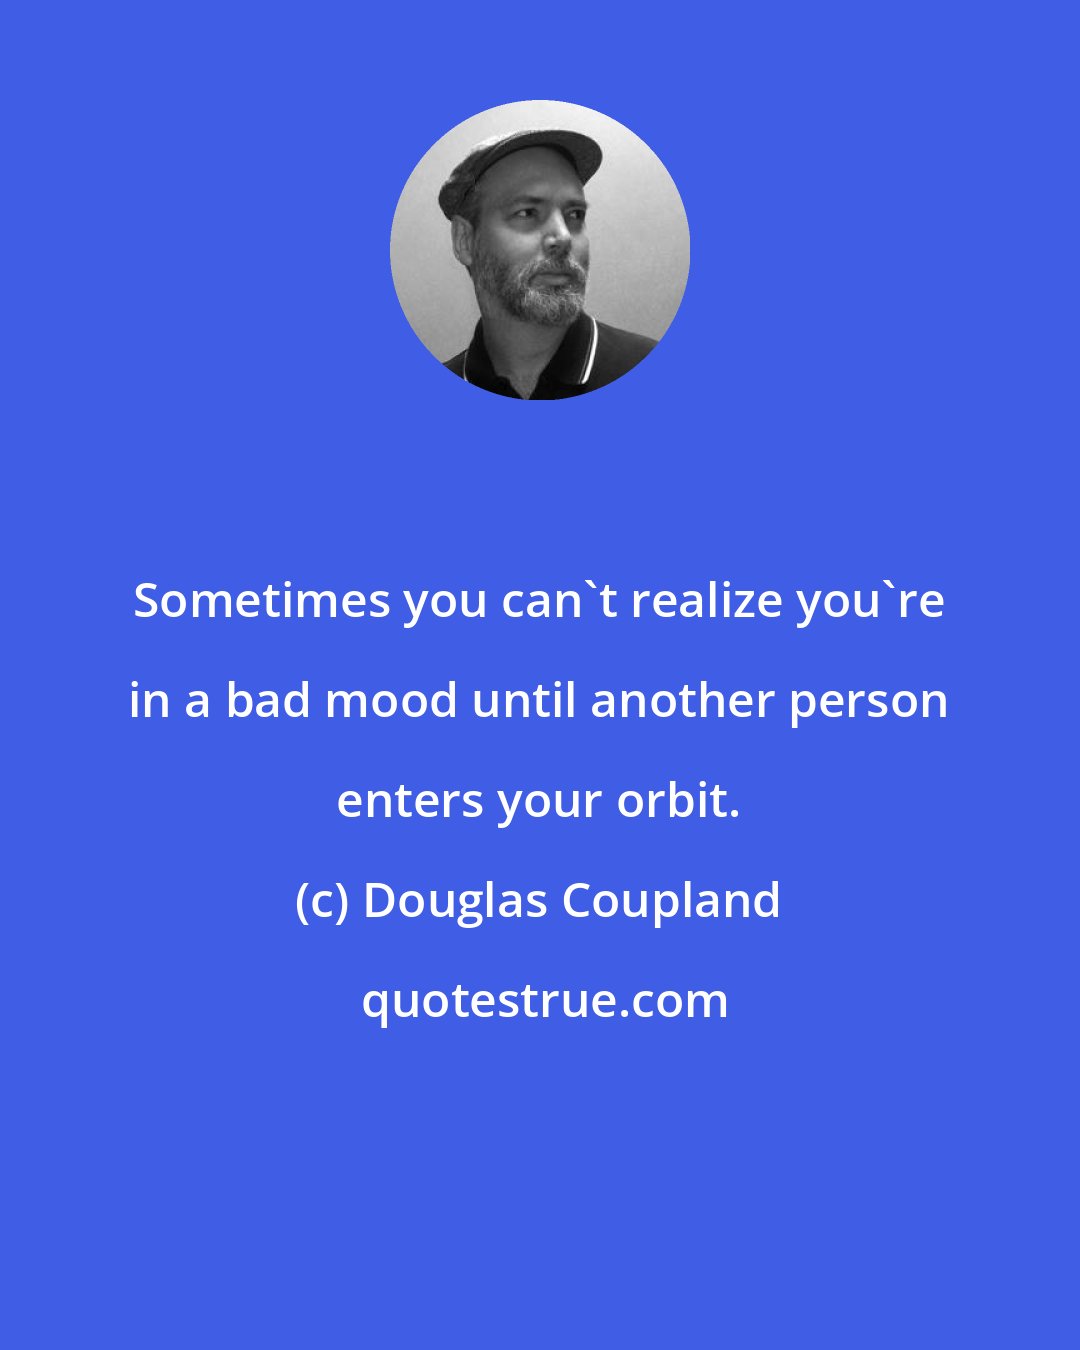 Douglas Coupland: Sometimes you can't realize you're in a bad mood until another person enters your orbit.